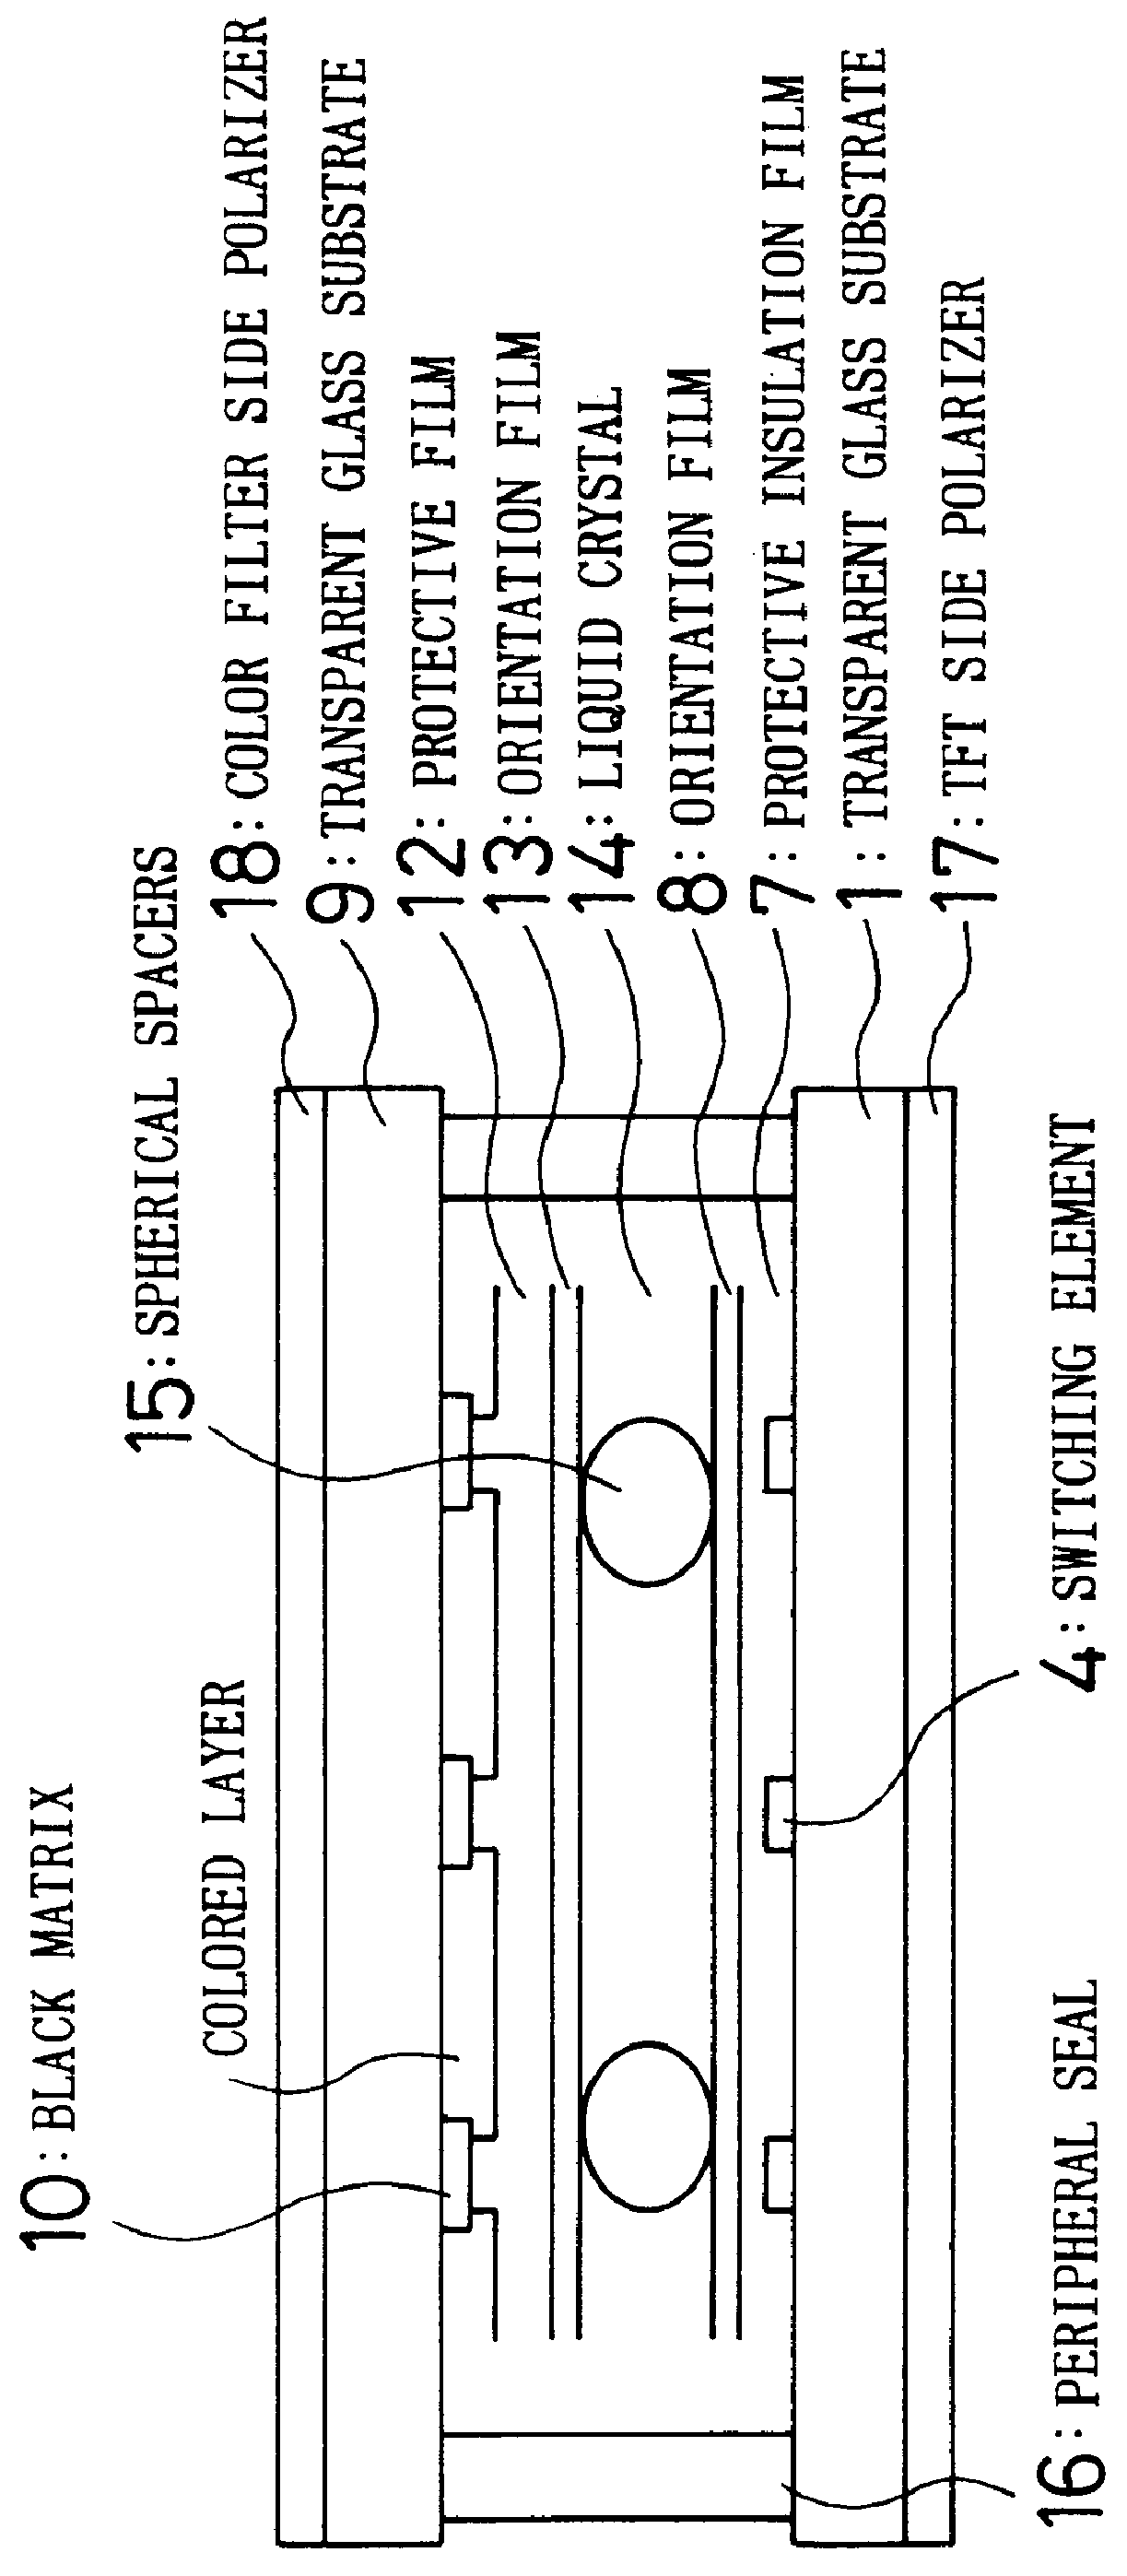 Liquid crystal display device and manufacturing method for same